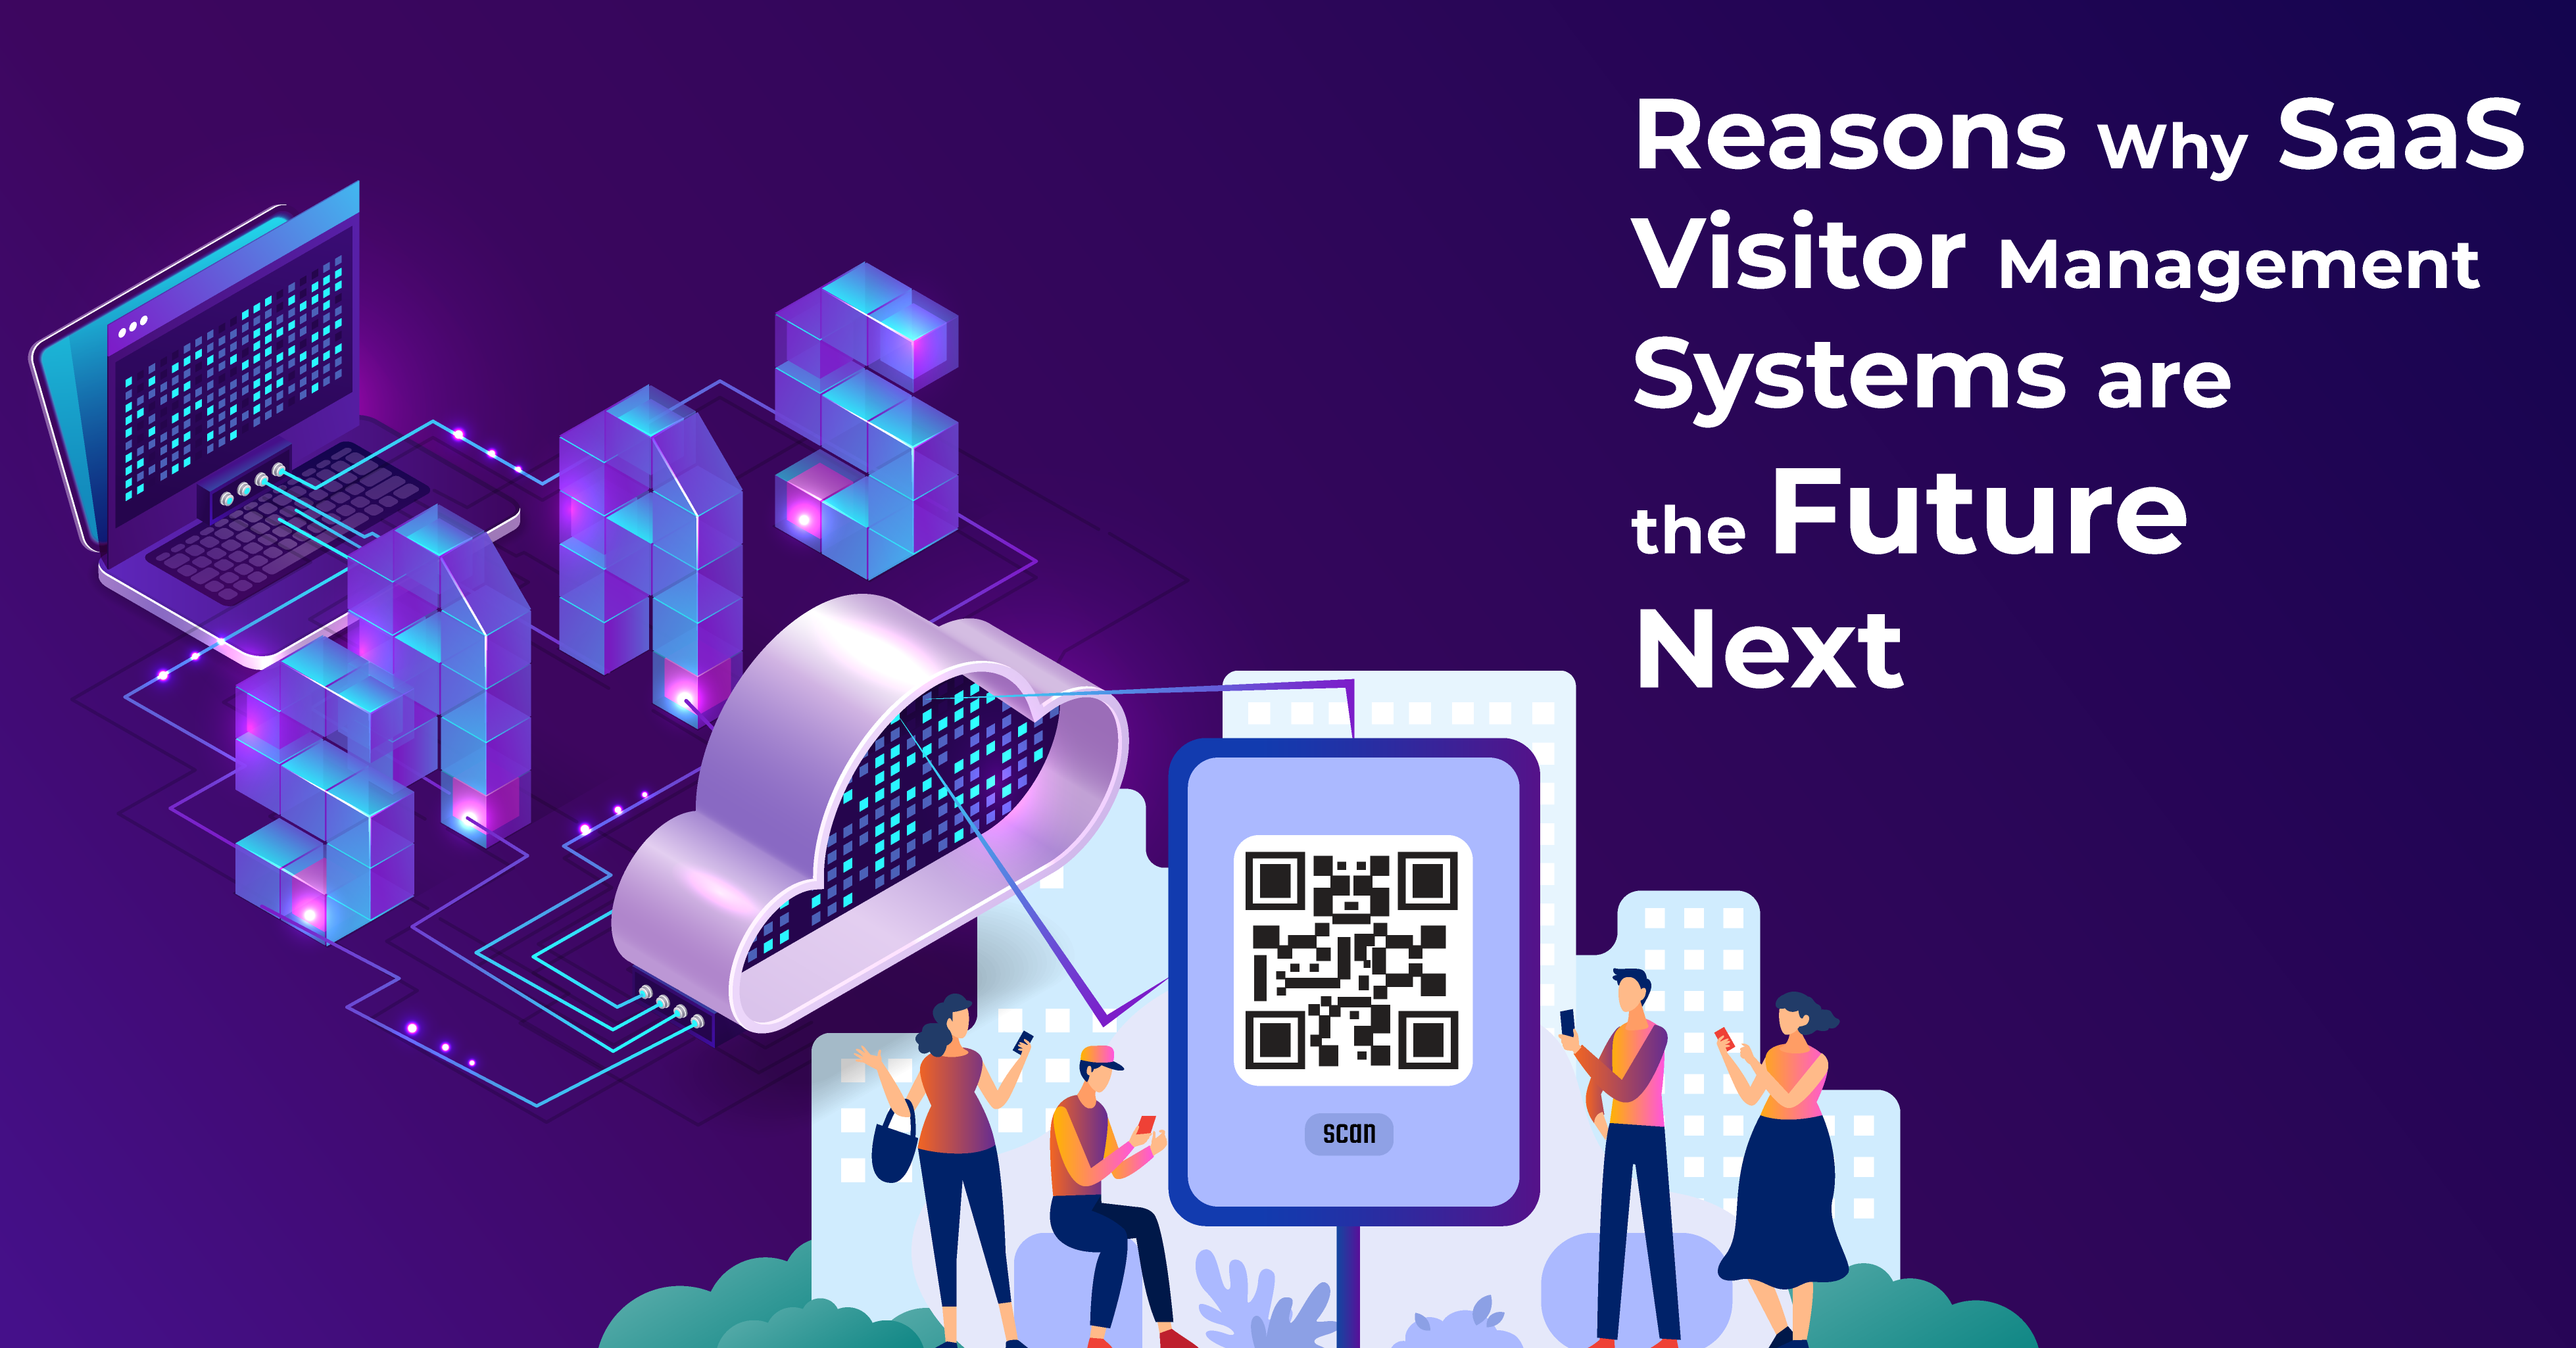 Reasons Why SaaS Visitor Management Systems are the Future Next